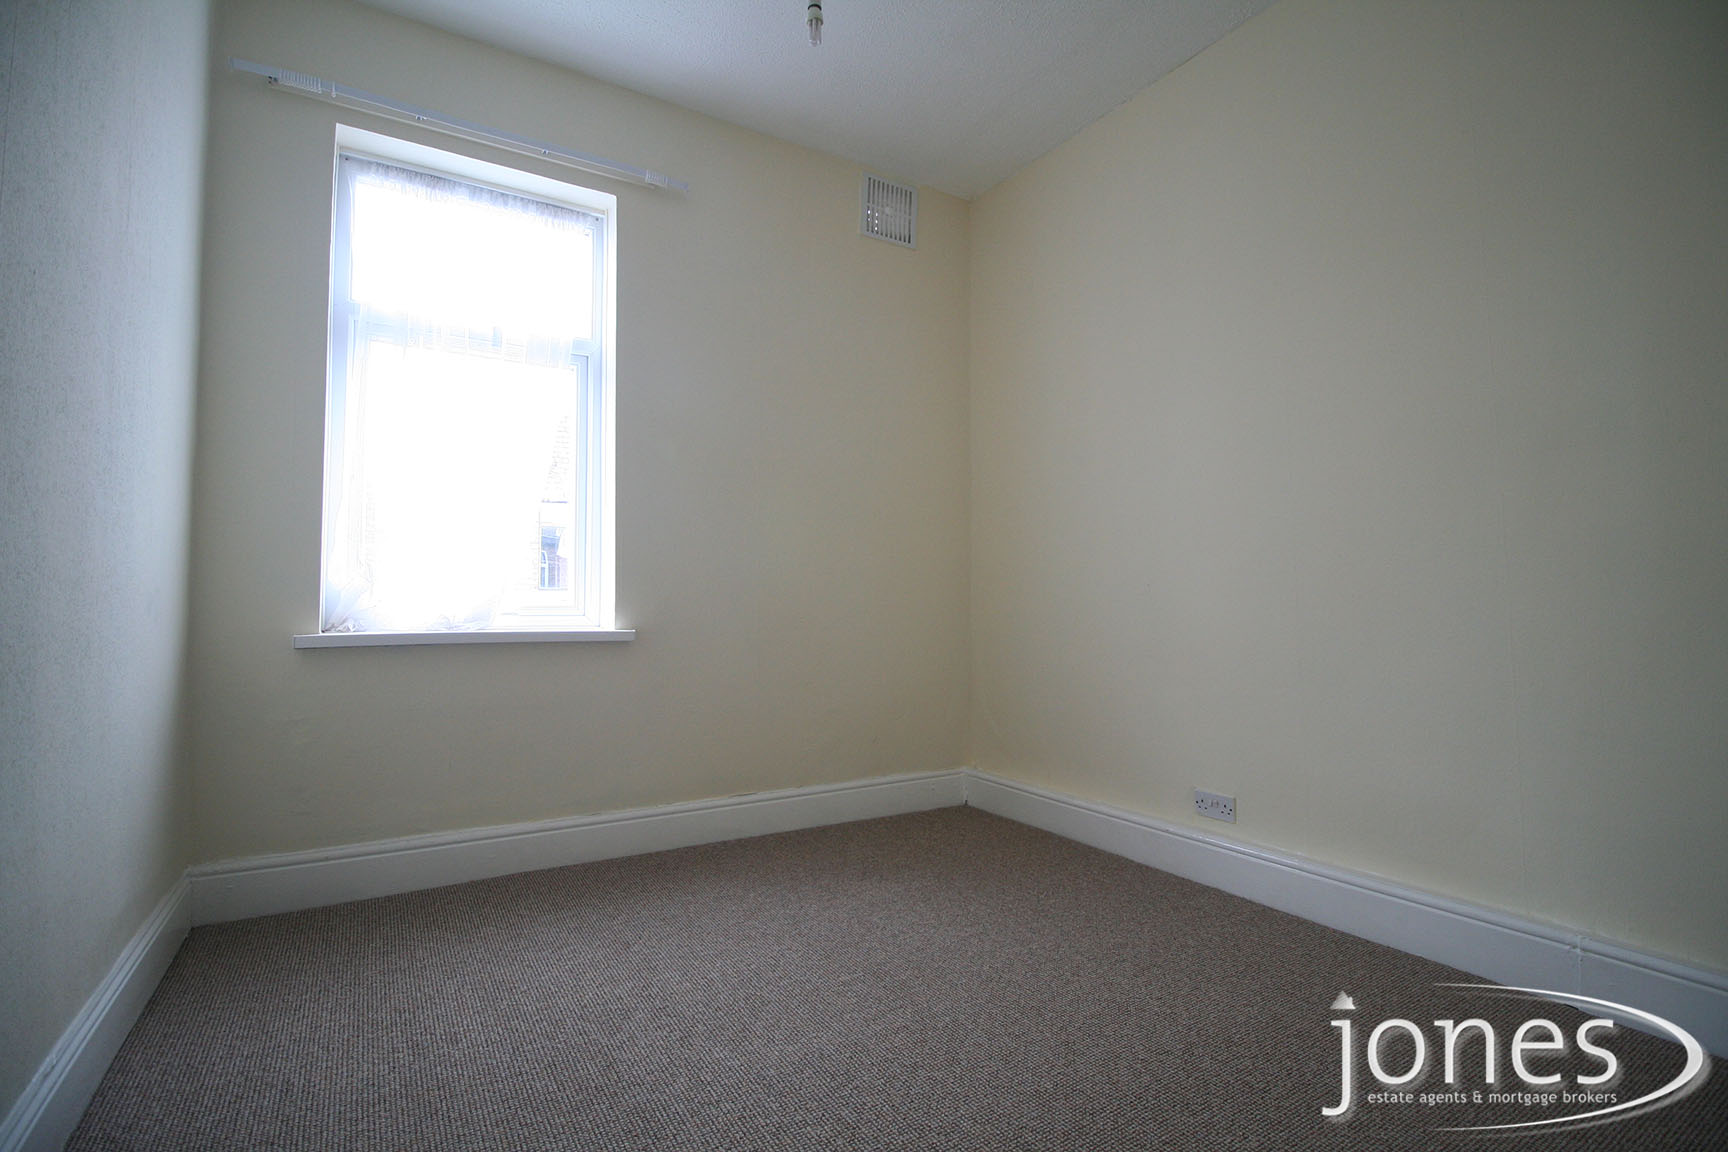 Home for Sale Let - Photo 07 Victoria Road,  Thornaby, Stockton on Tees TS17 6HH